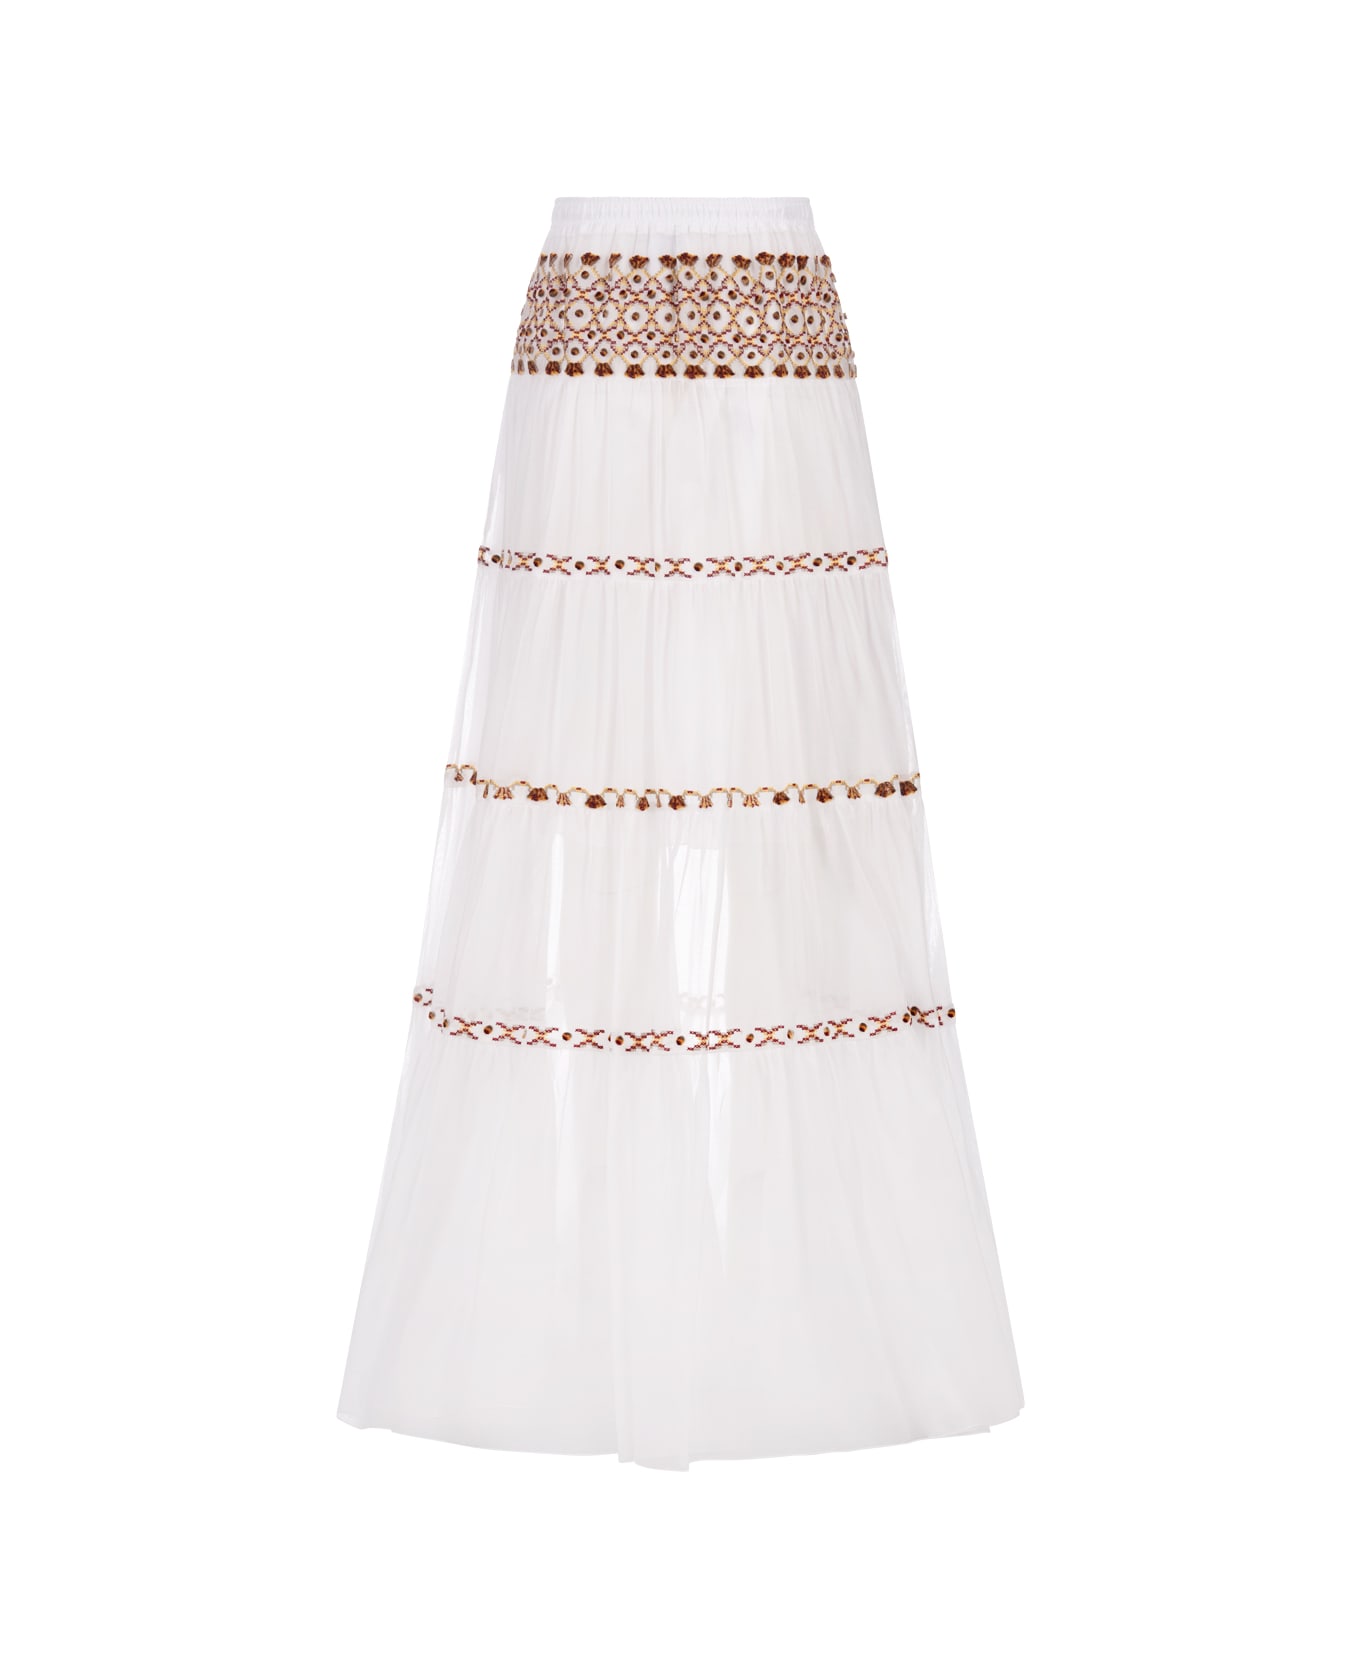 Ermanno Scervino White Muslin Long Skirt With Ethnic Embroidery - White